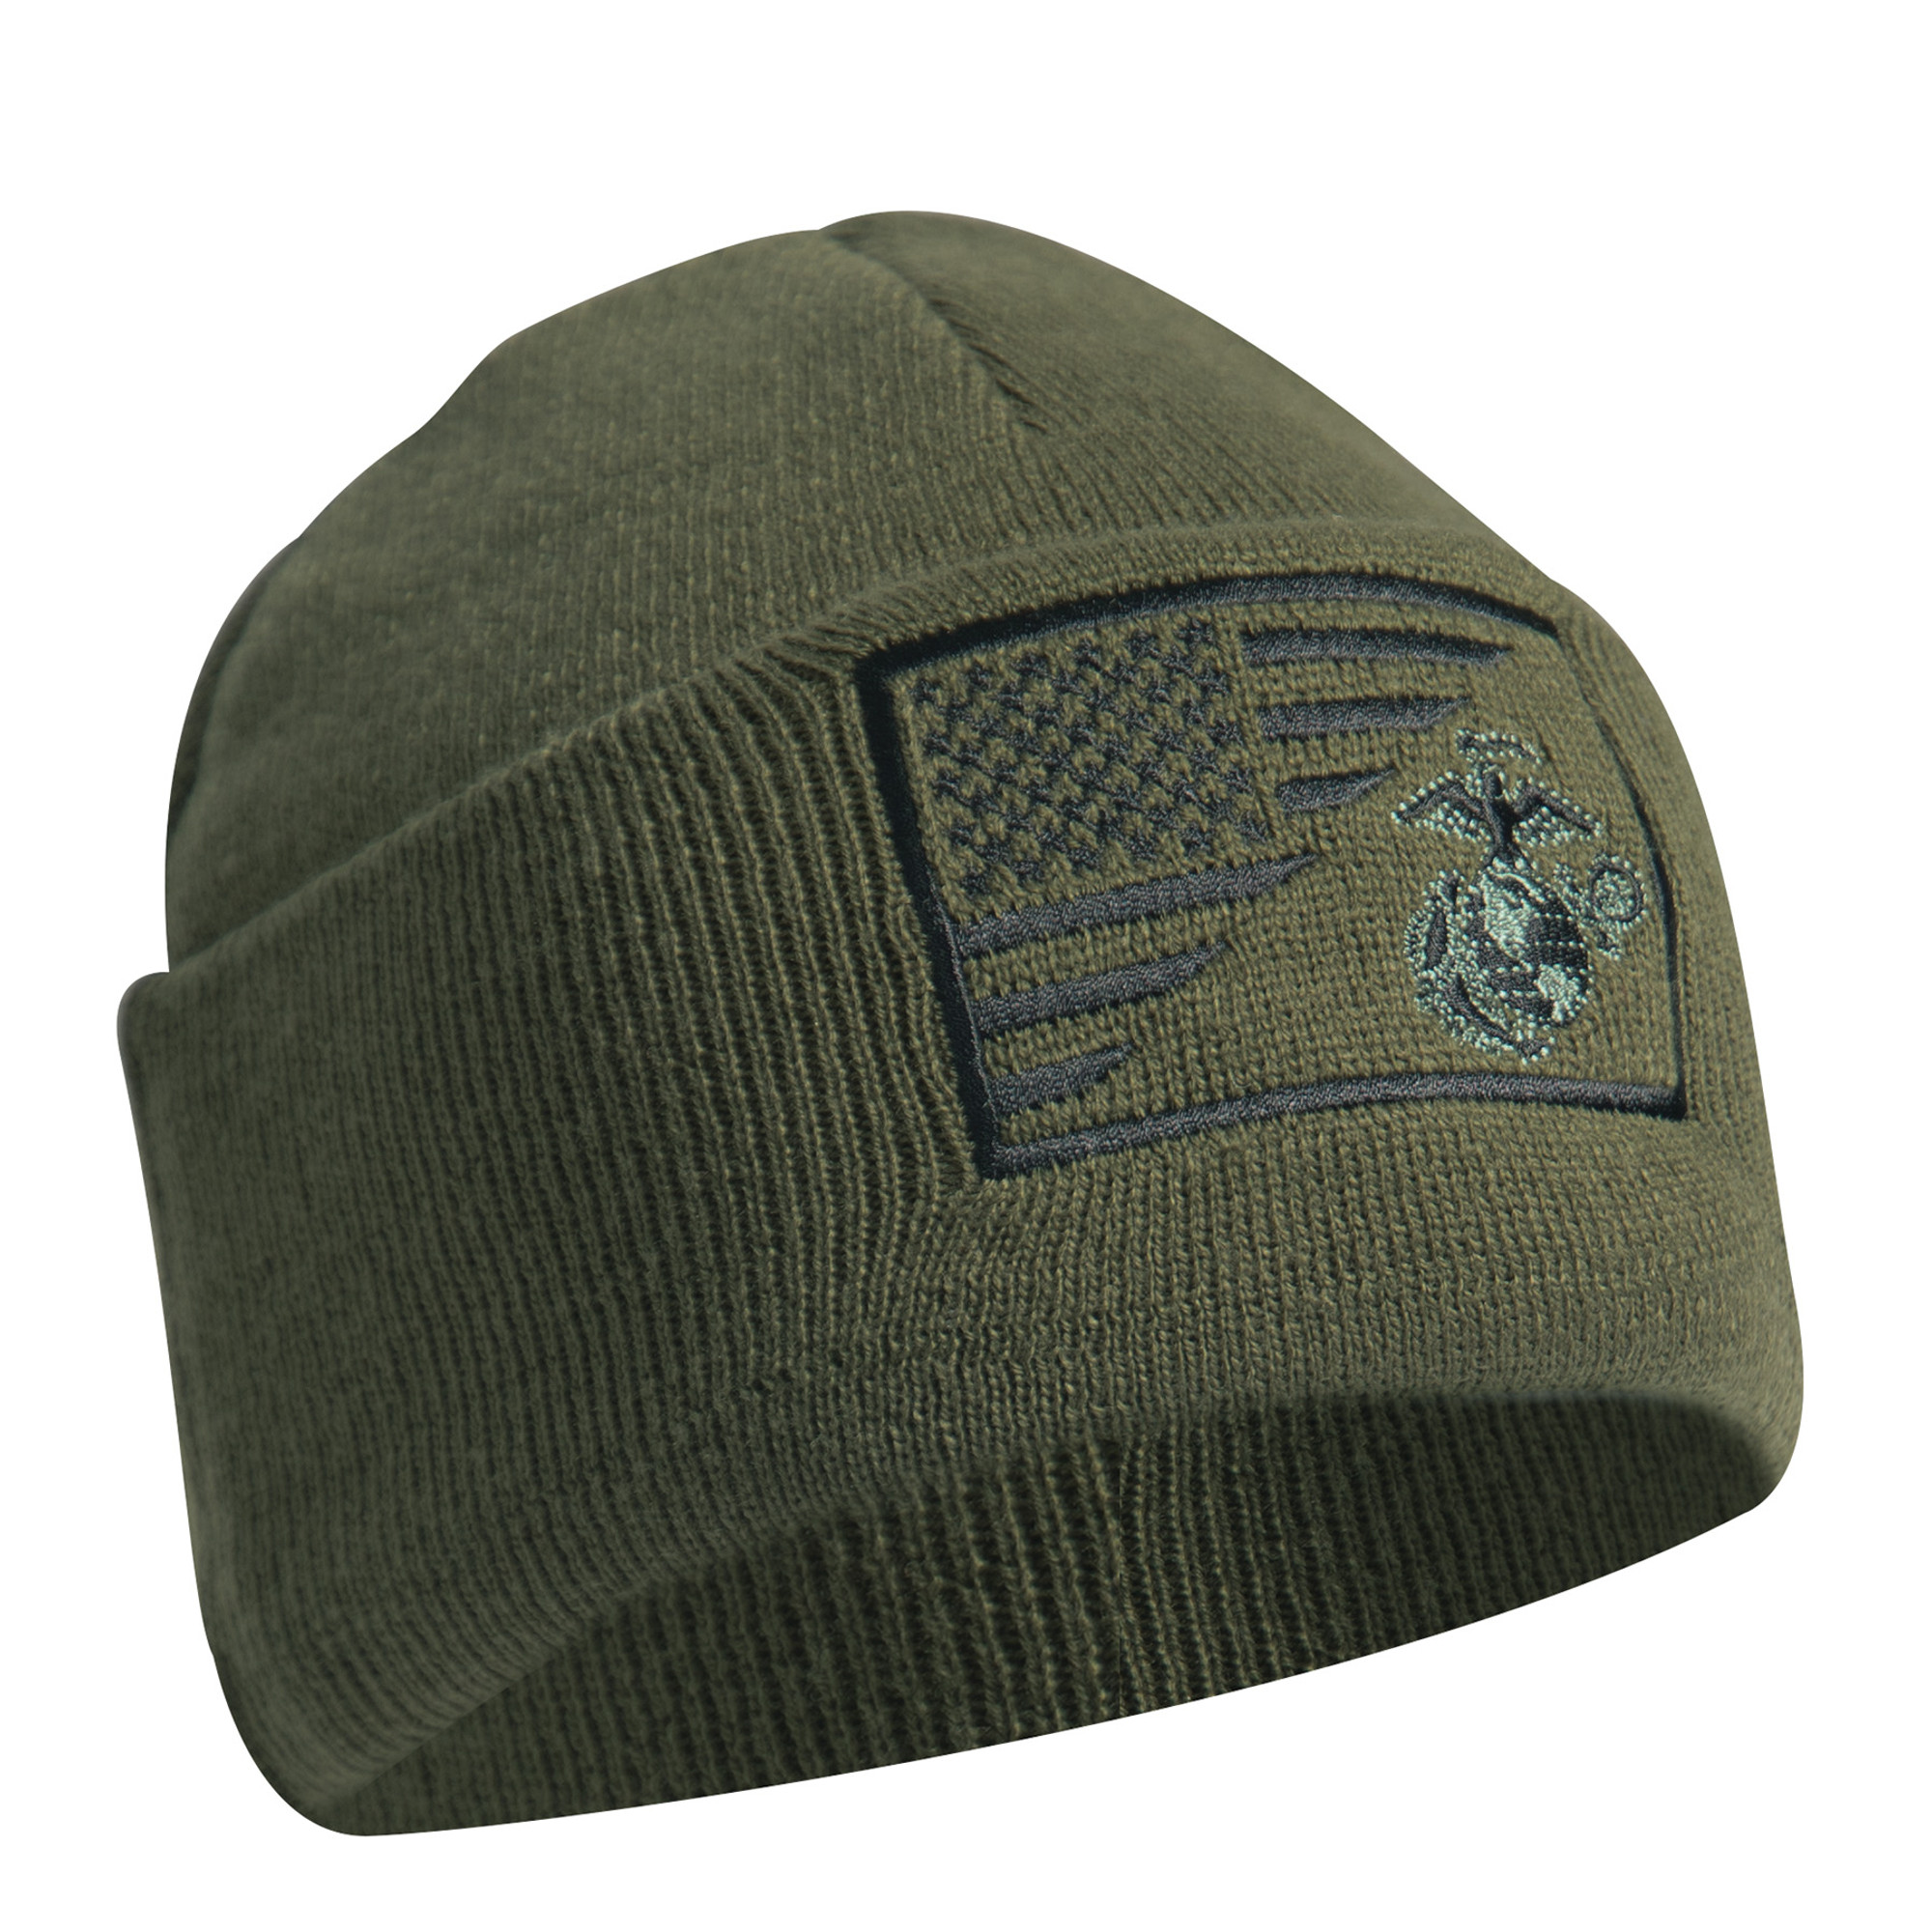 Rothco USMC Eagle, Globe and Anchor/US Flag Deluxe Fine Knit Watch Cap - Olive Drab